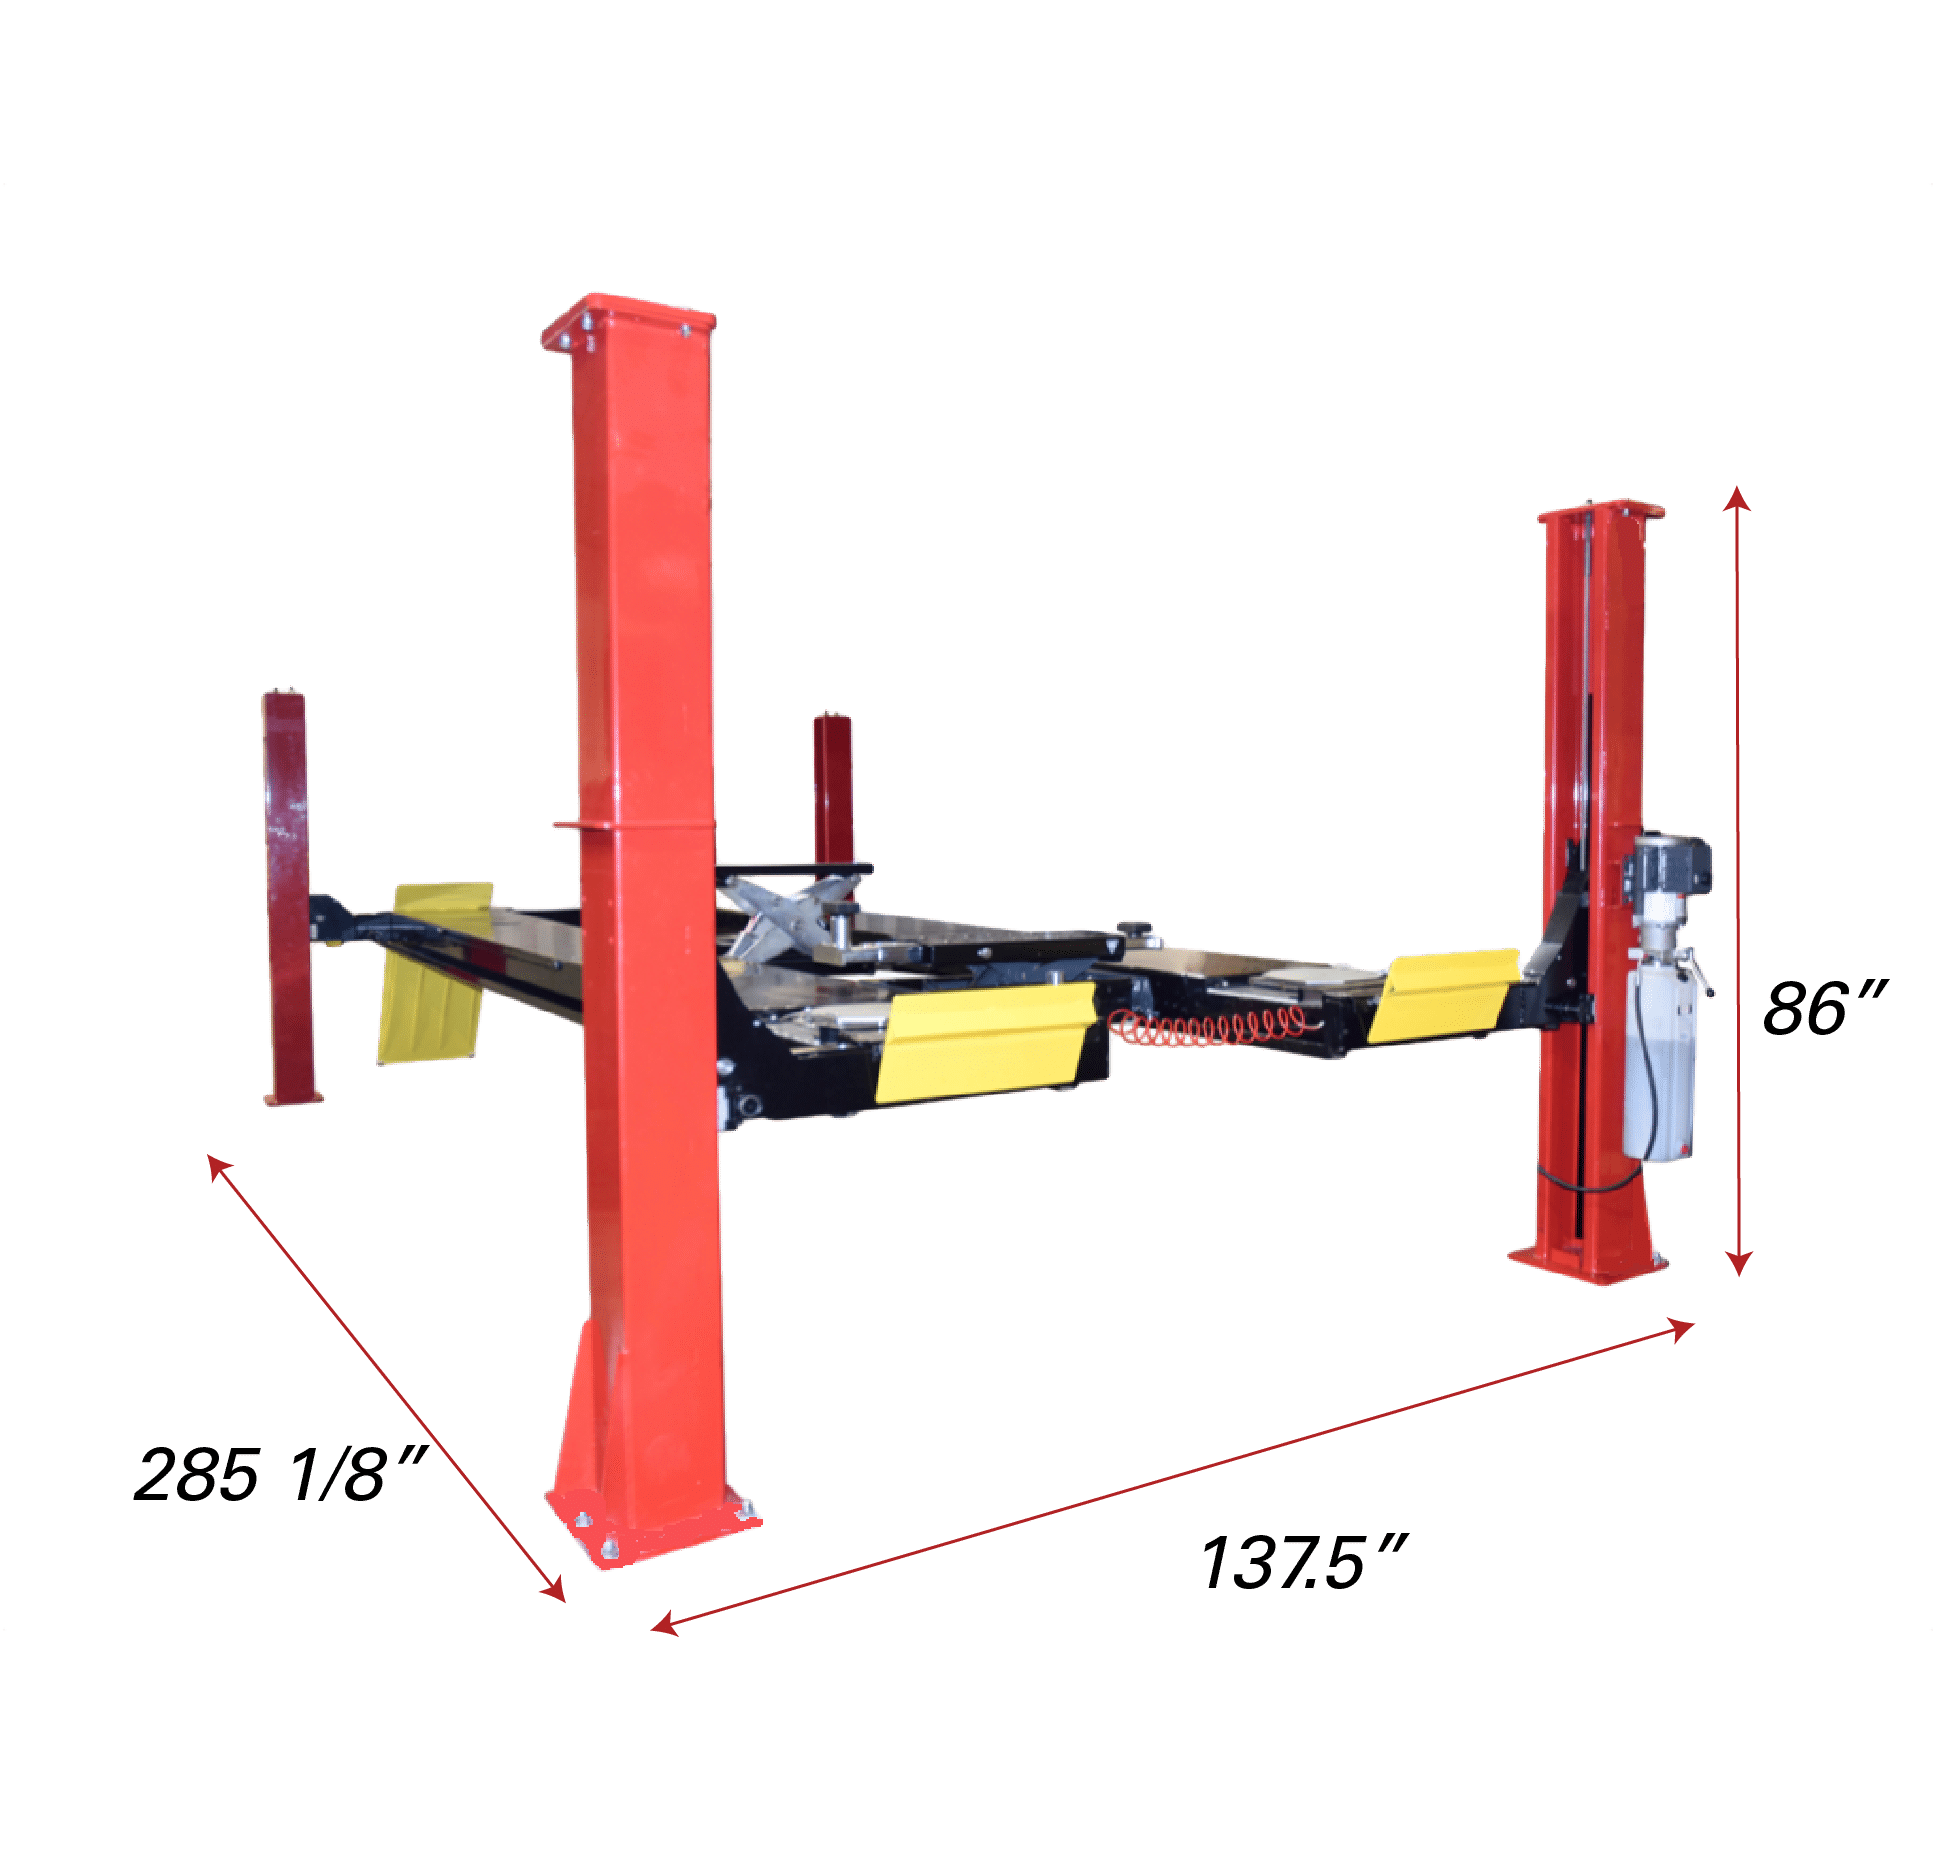 Red lines ending in arrows span the dimensions of the height, width, and length of the 15K four post lift to show product footprint